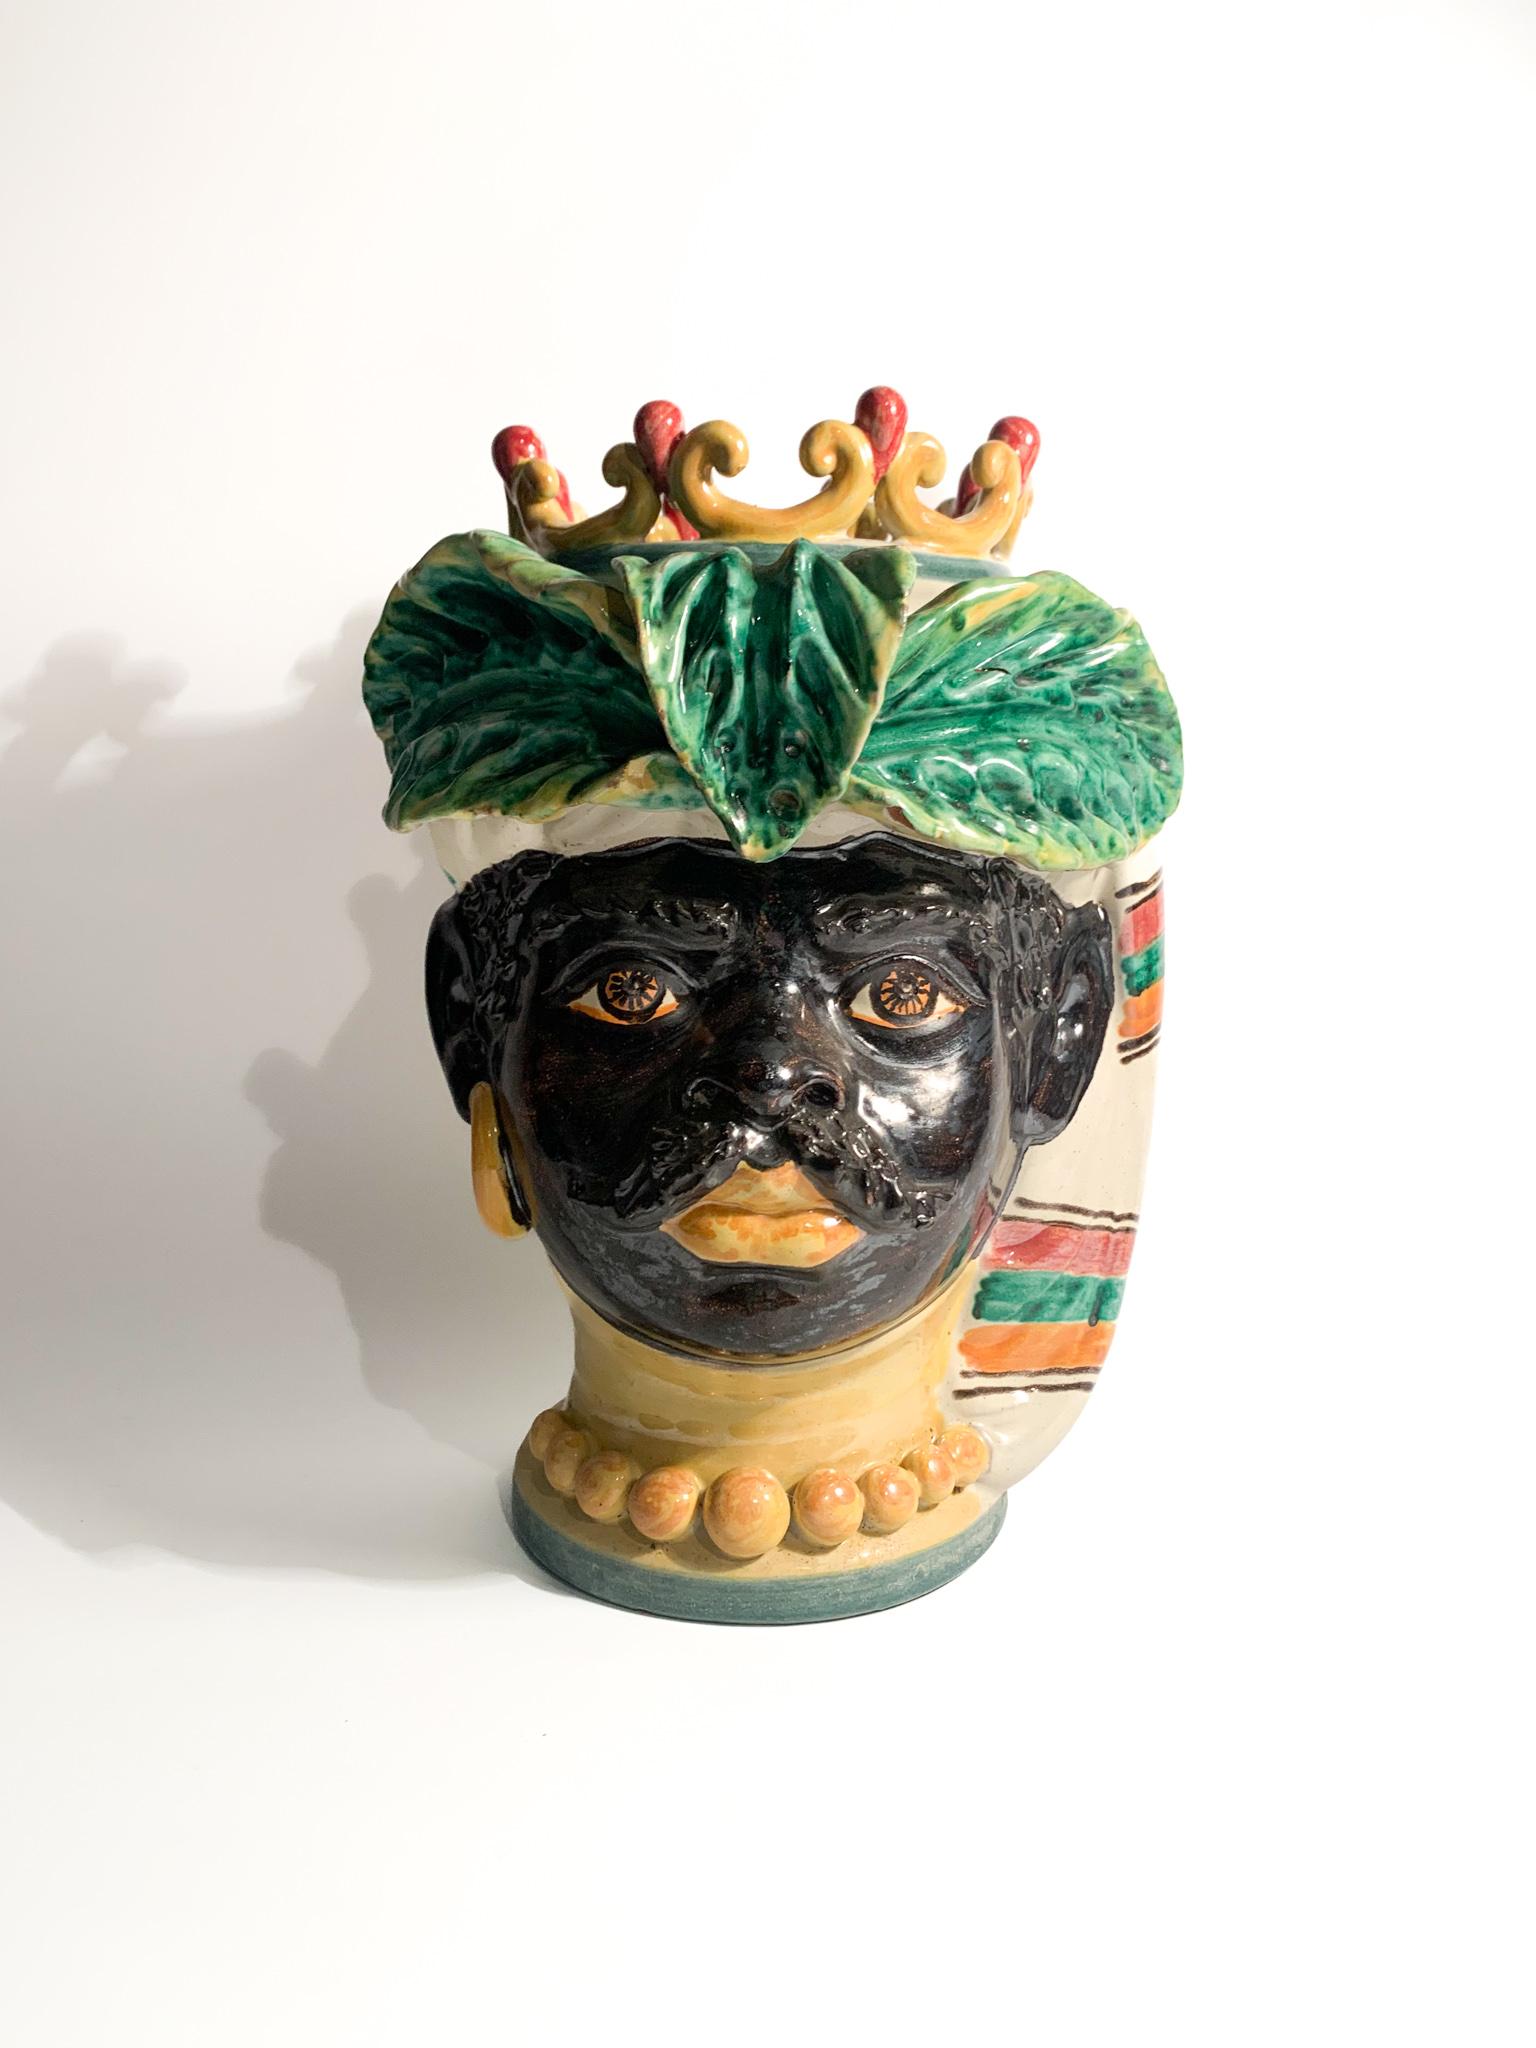 Moor's Head in Caltagirone Ceramics made by Giacomo Alessi in the 90s

Ø cm 21 h cm 30

Giacomo Alessi is an Italian master ceramist born in Caltagirone, Sicily, in 1957. He is one of the few registered Sicilian masters in the Book of Living Human